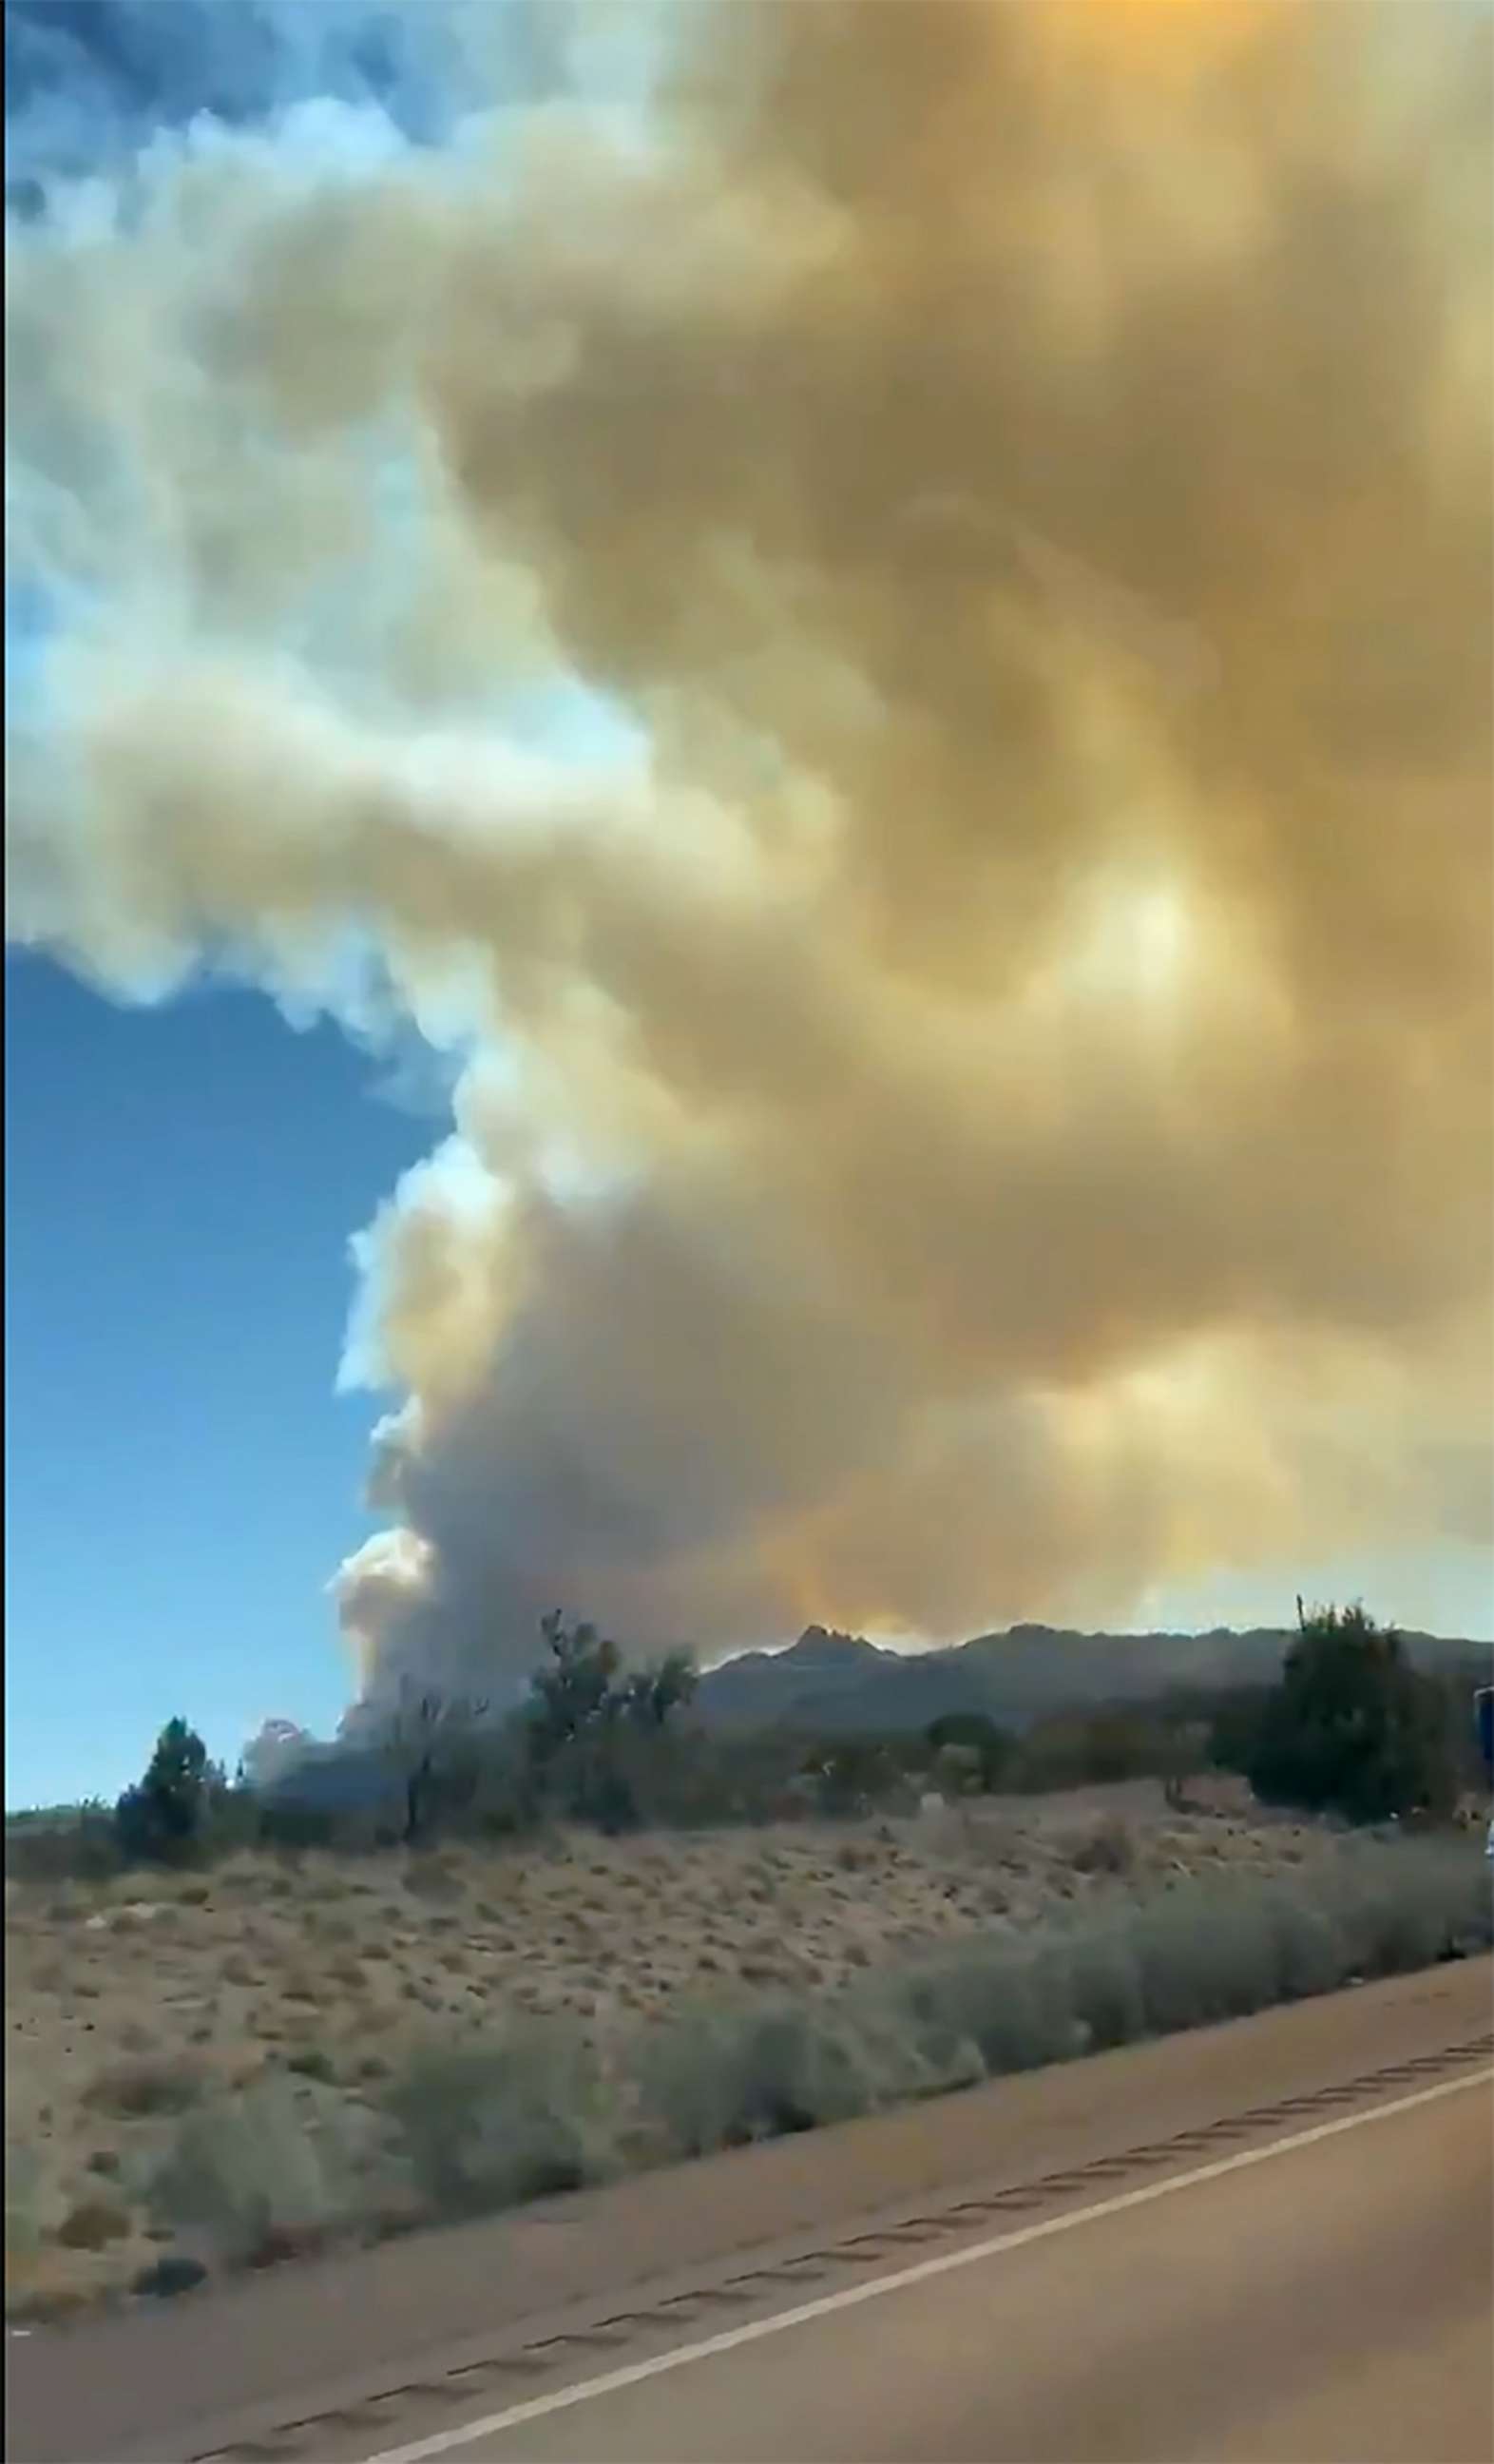 PHOTO: A cloud of smoke rises from the fires burning in Kingman, Ariz., April 25, 2021.